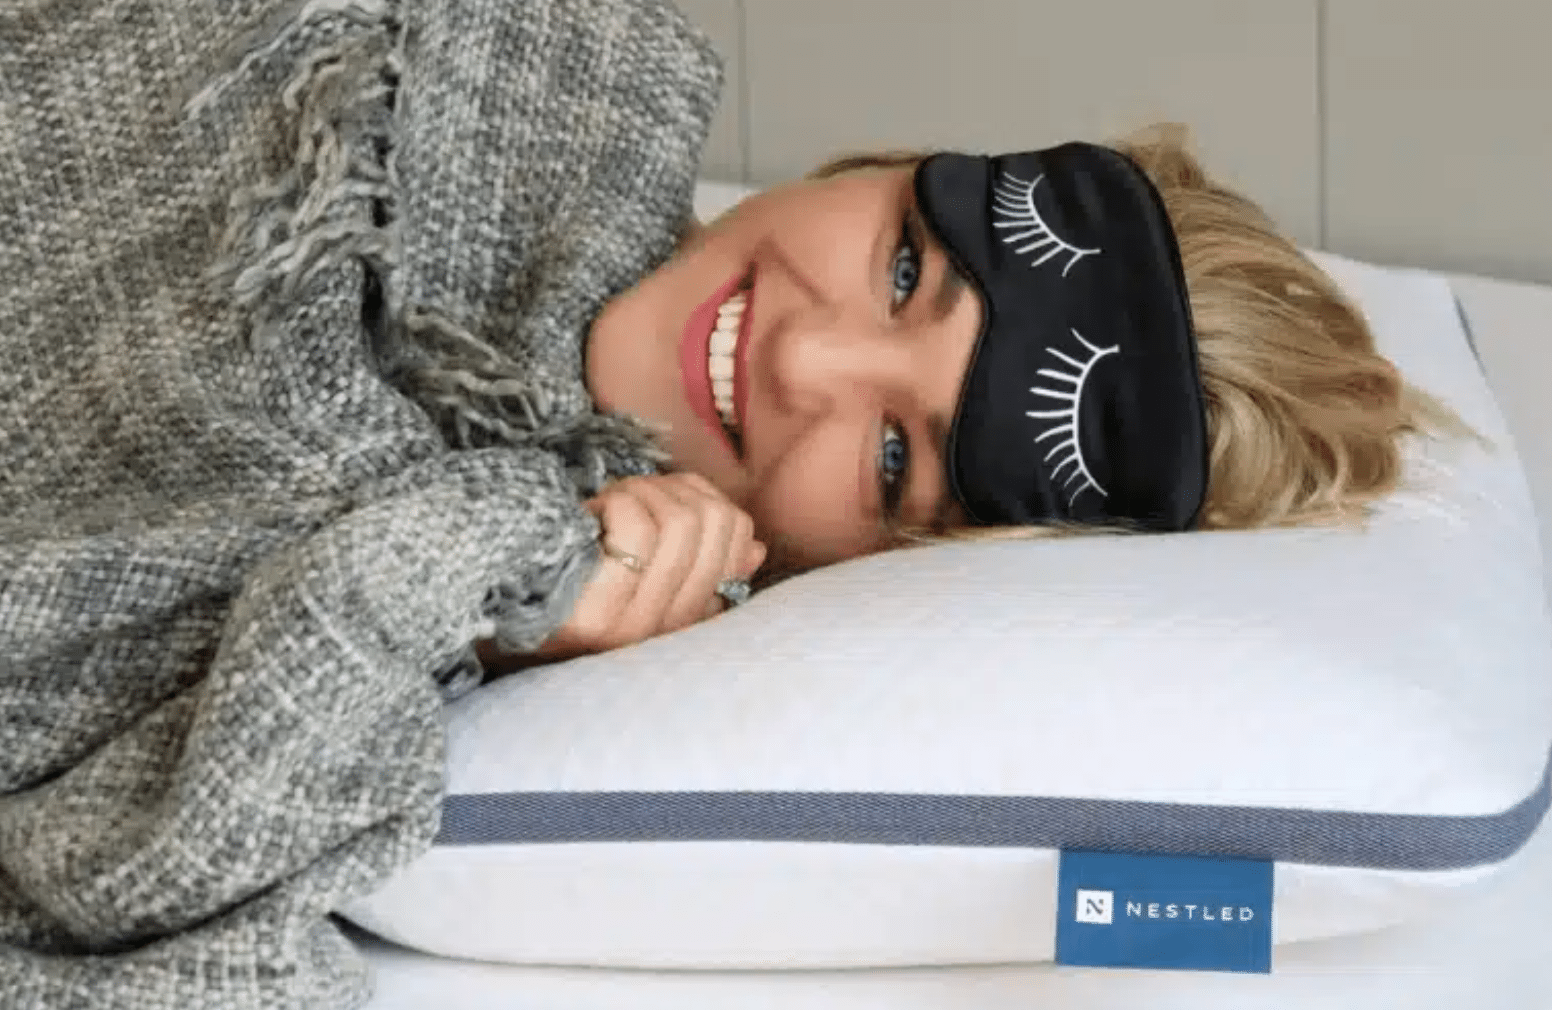  Girl lying on a Naturally Nestled pillow and mattress on a bed frame while laying under a gray blanket and wearing a sleep mask on her forehead
